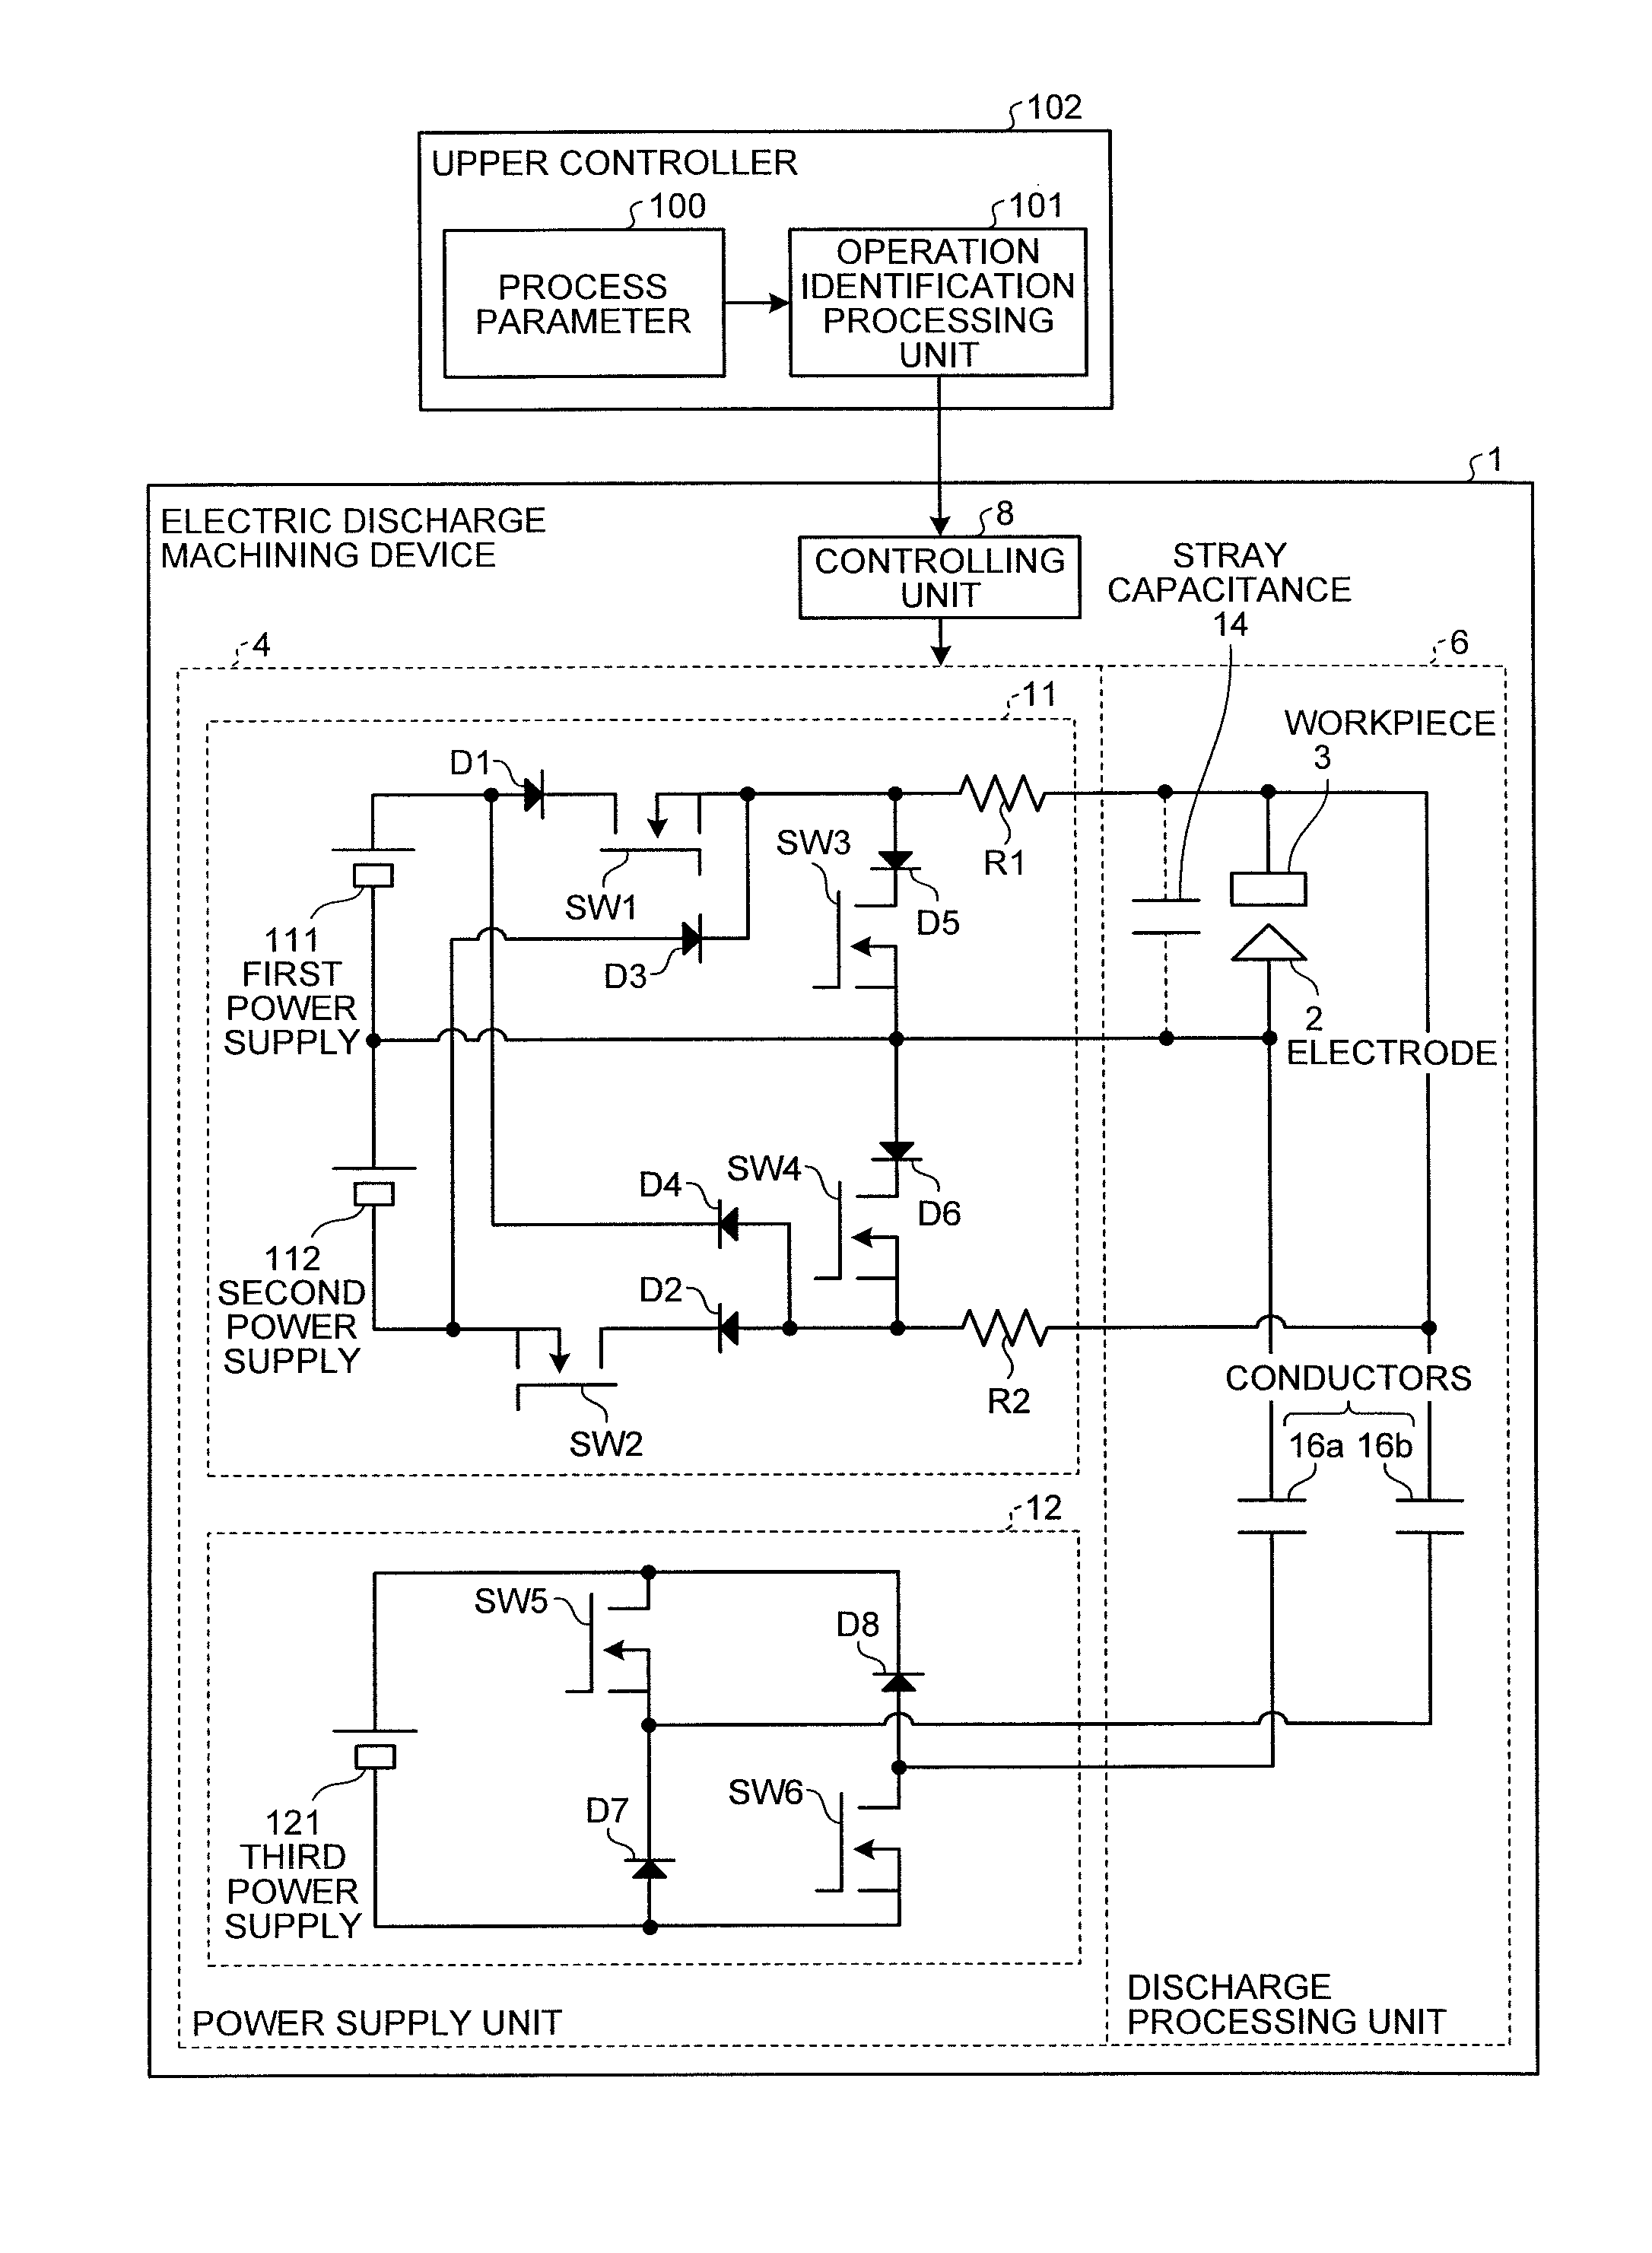 Electric discharge machining device that applies a voltage pulse between a processing electrode and a workpiece